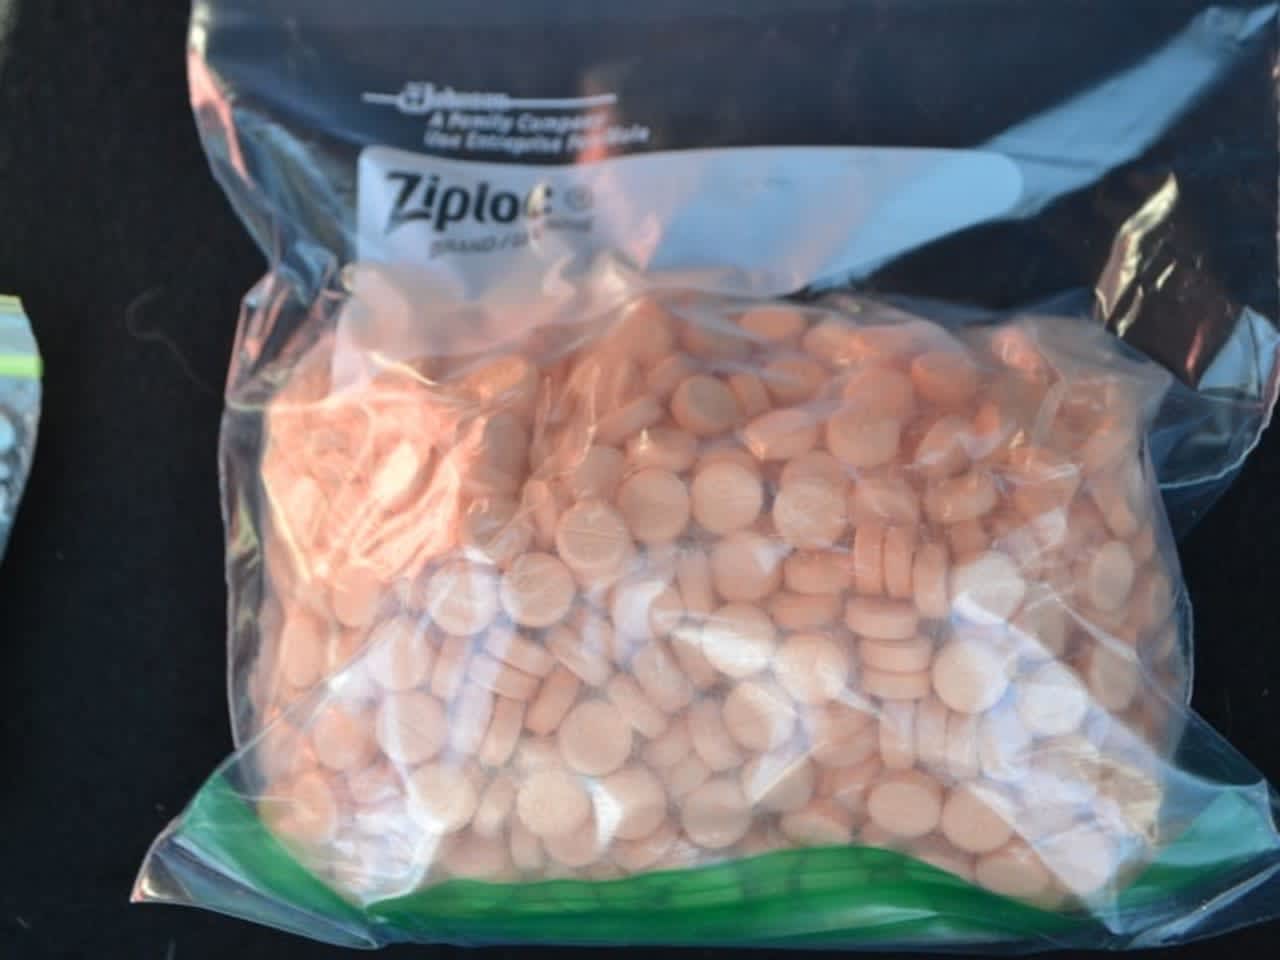 Lethal drugs disguised as prescription medication has made the rounds in Suffolk County.